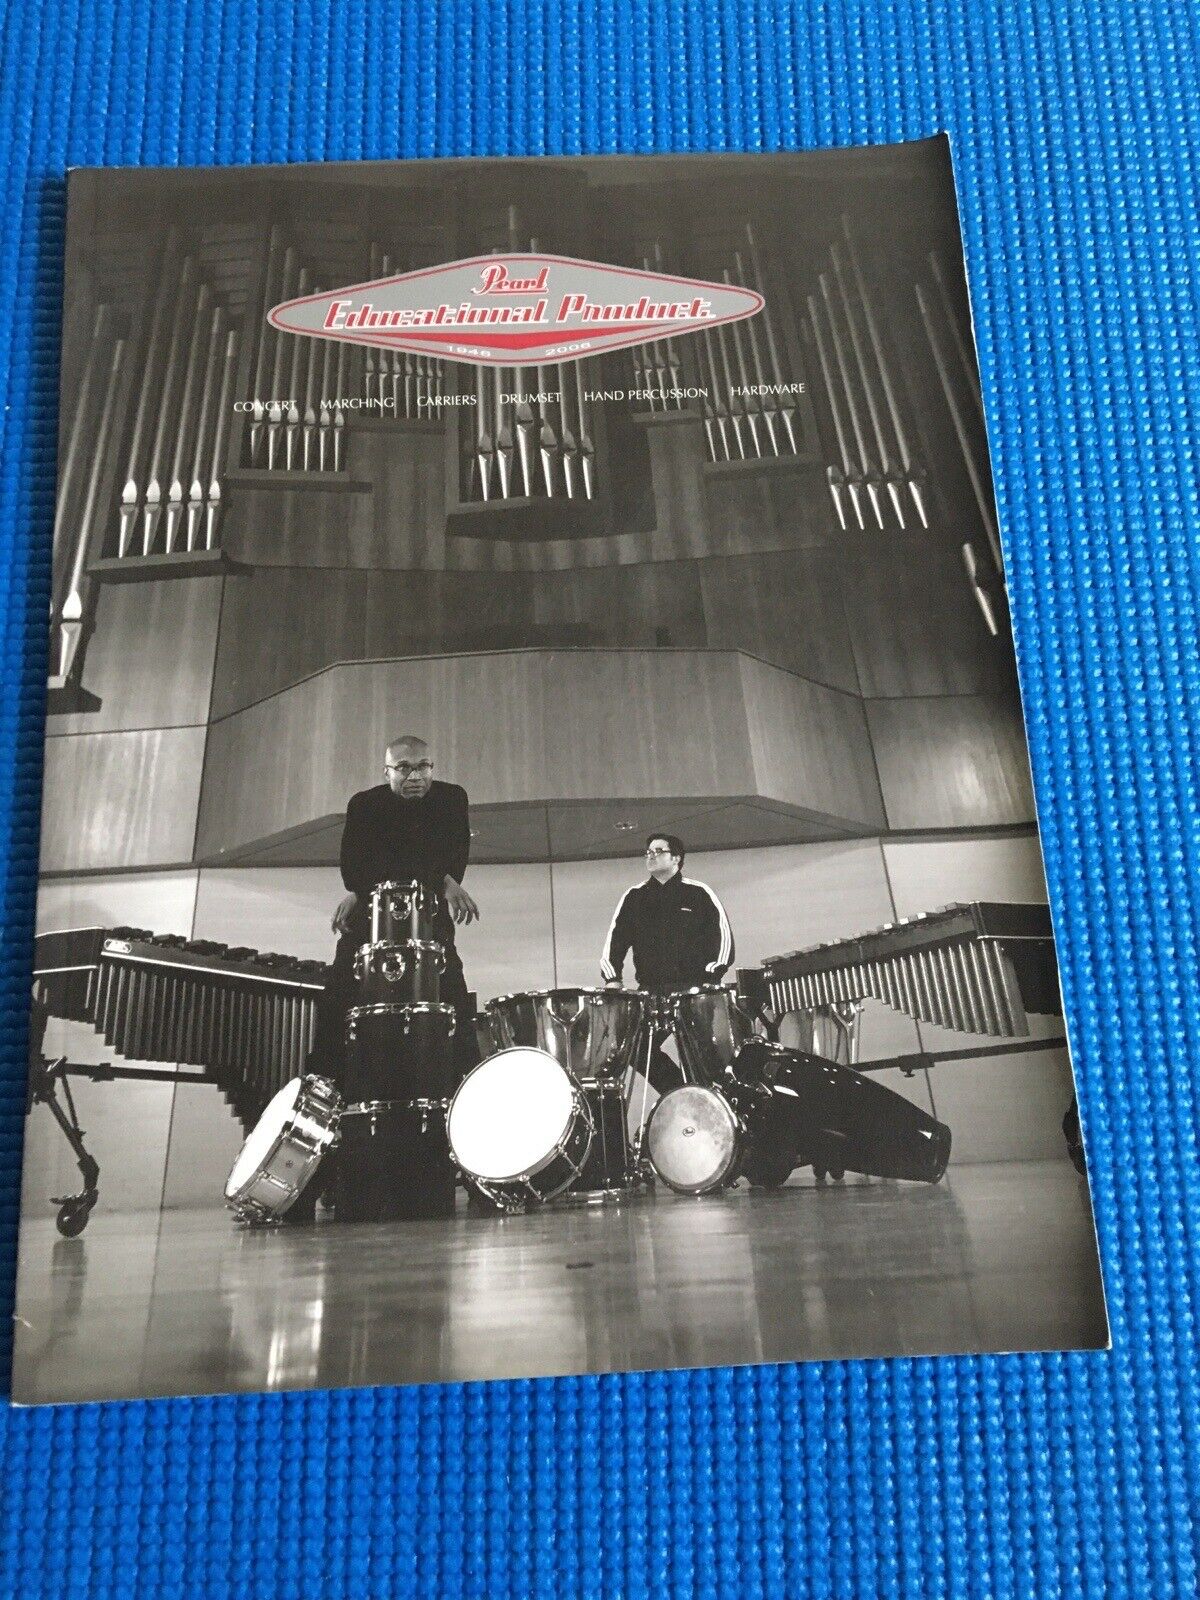 Pearl Drums Educational Product Book 2006